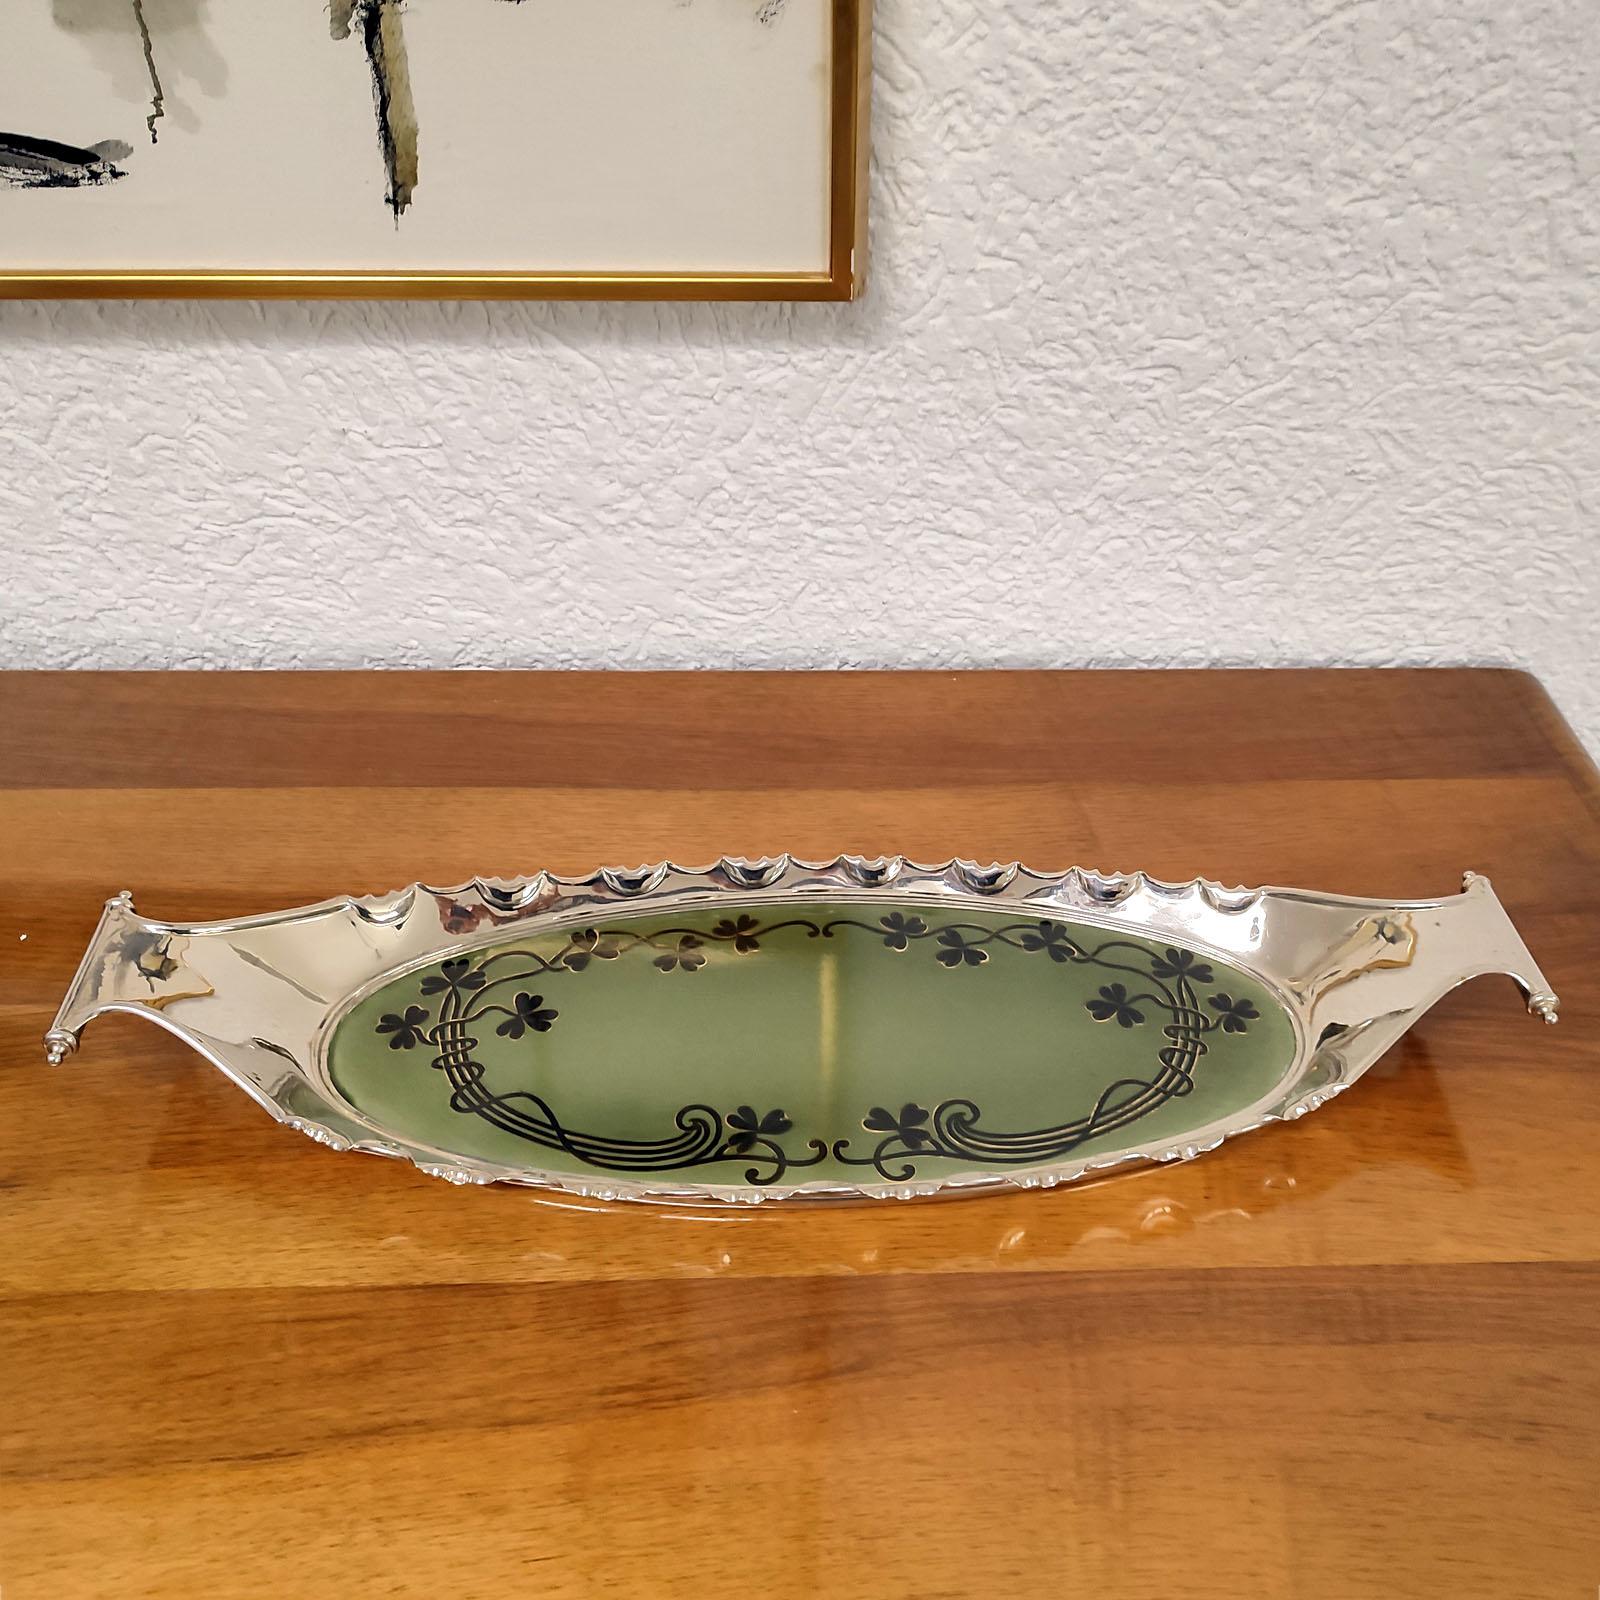 Early 20th Century Art Nouveau Villeroy & Boch Silver Plated Serving Tray, circa 1900 For Sale